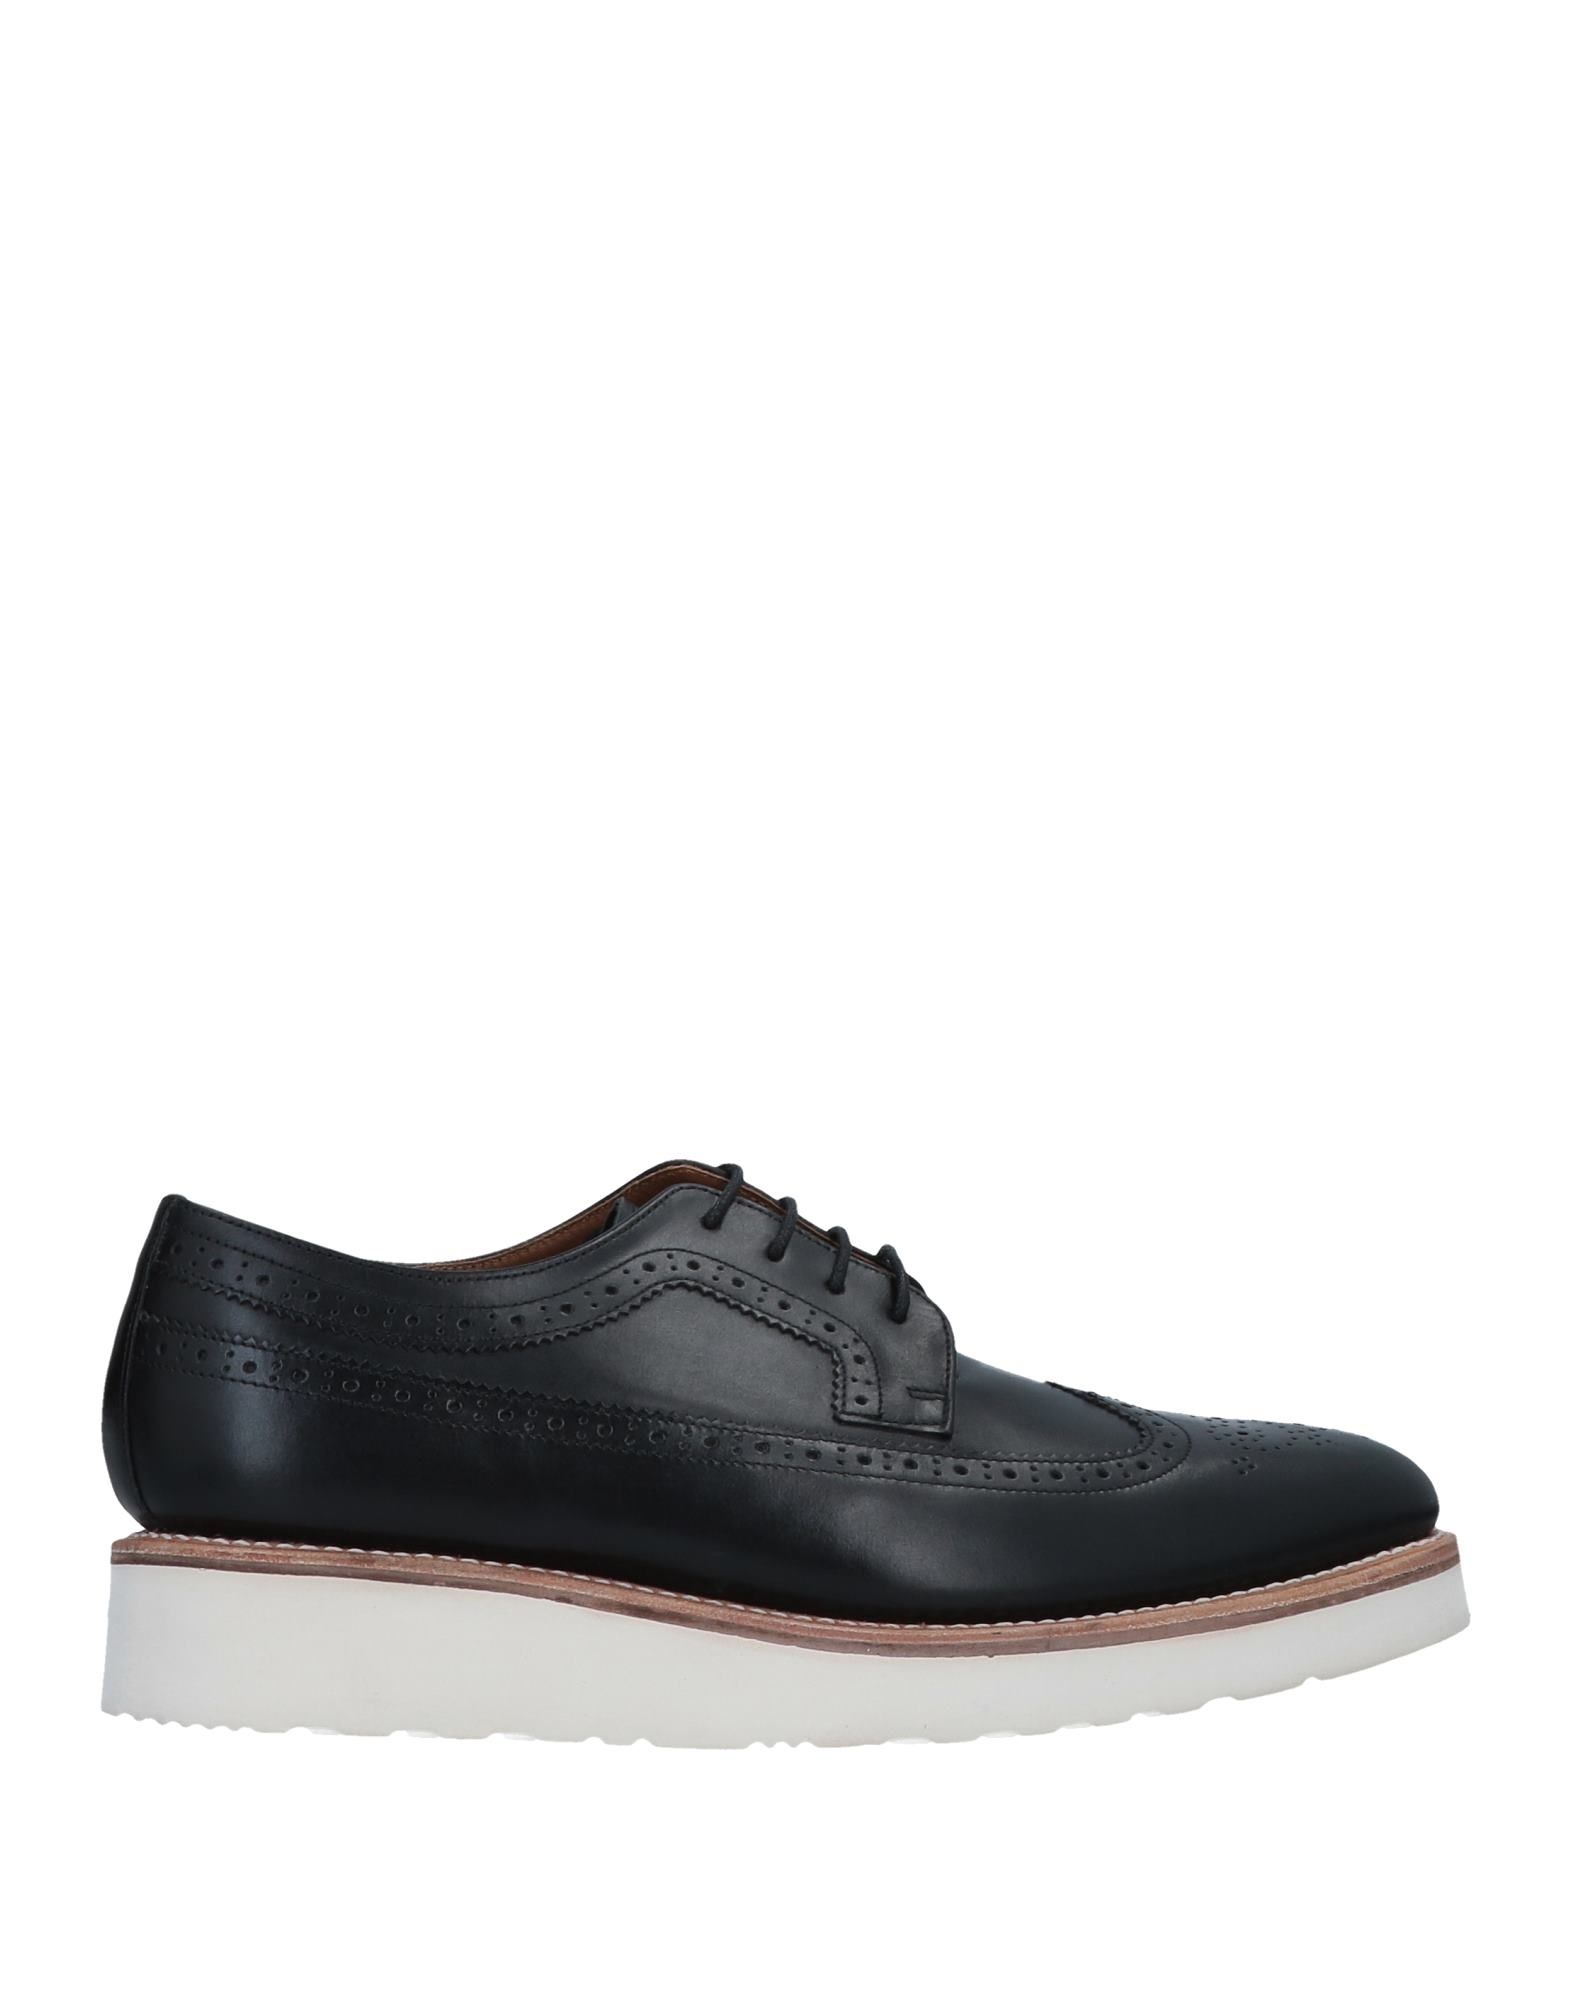 GRENSON Laced shoes,11506924VK 10